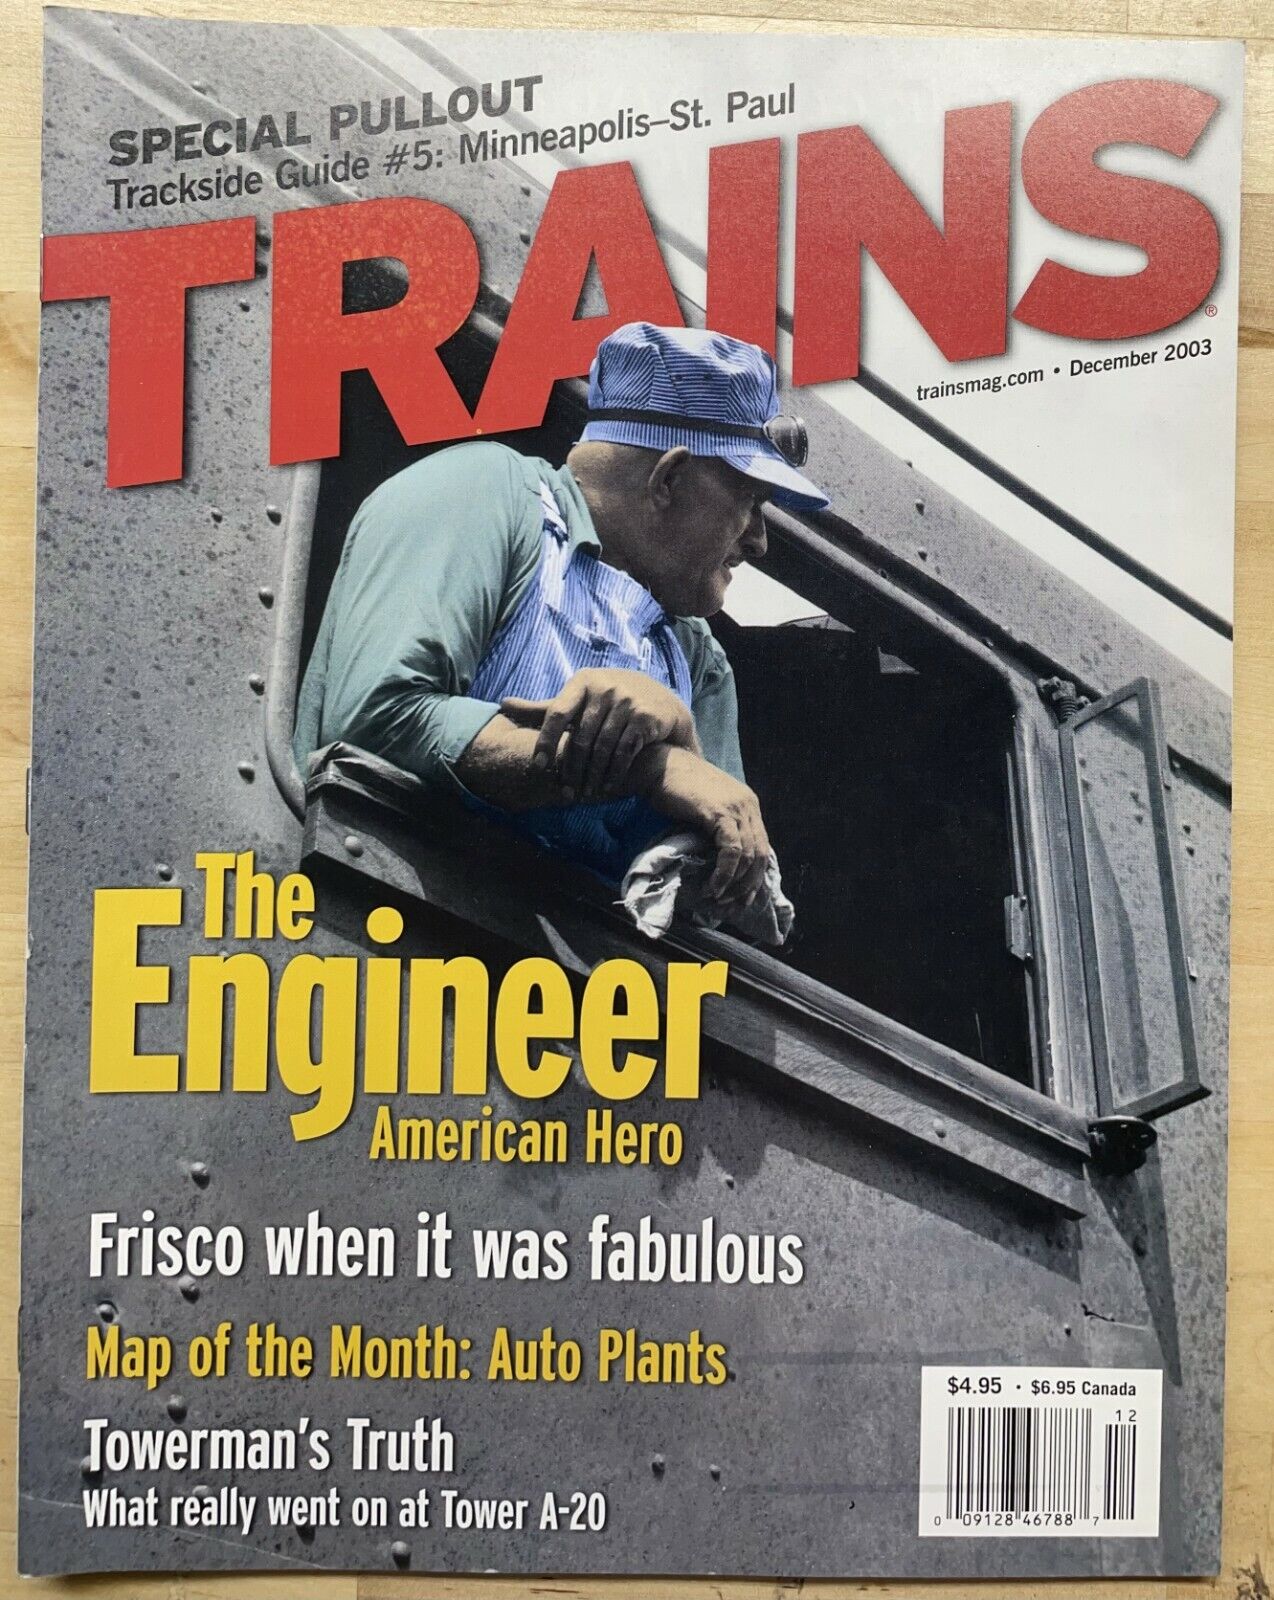 TRAINS Magazine December 2003 THE ENGINEER, Frisco, Springfield MO 1955, Tower